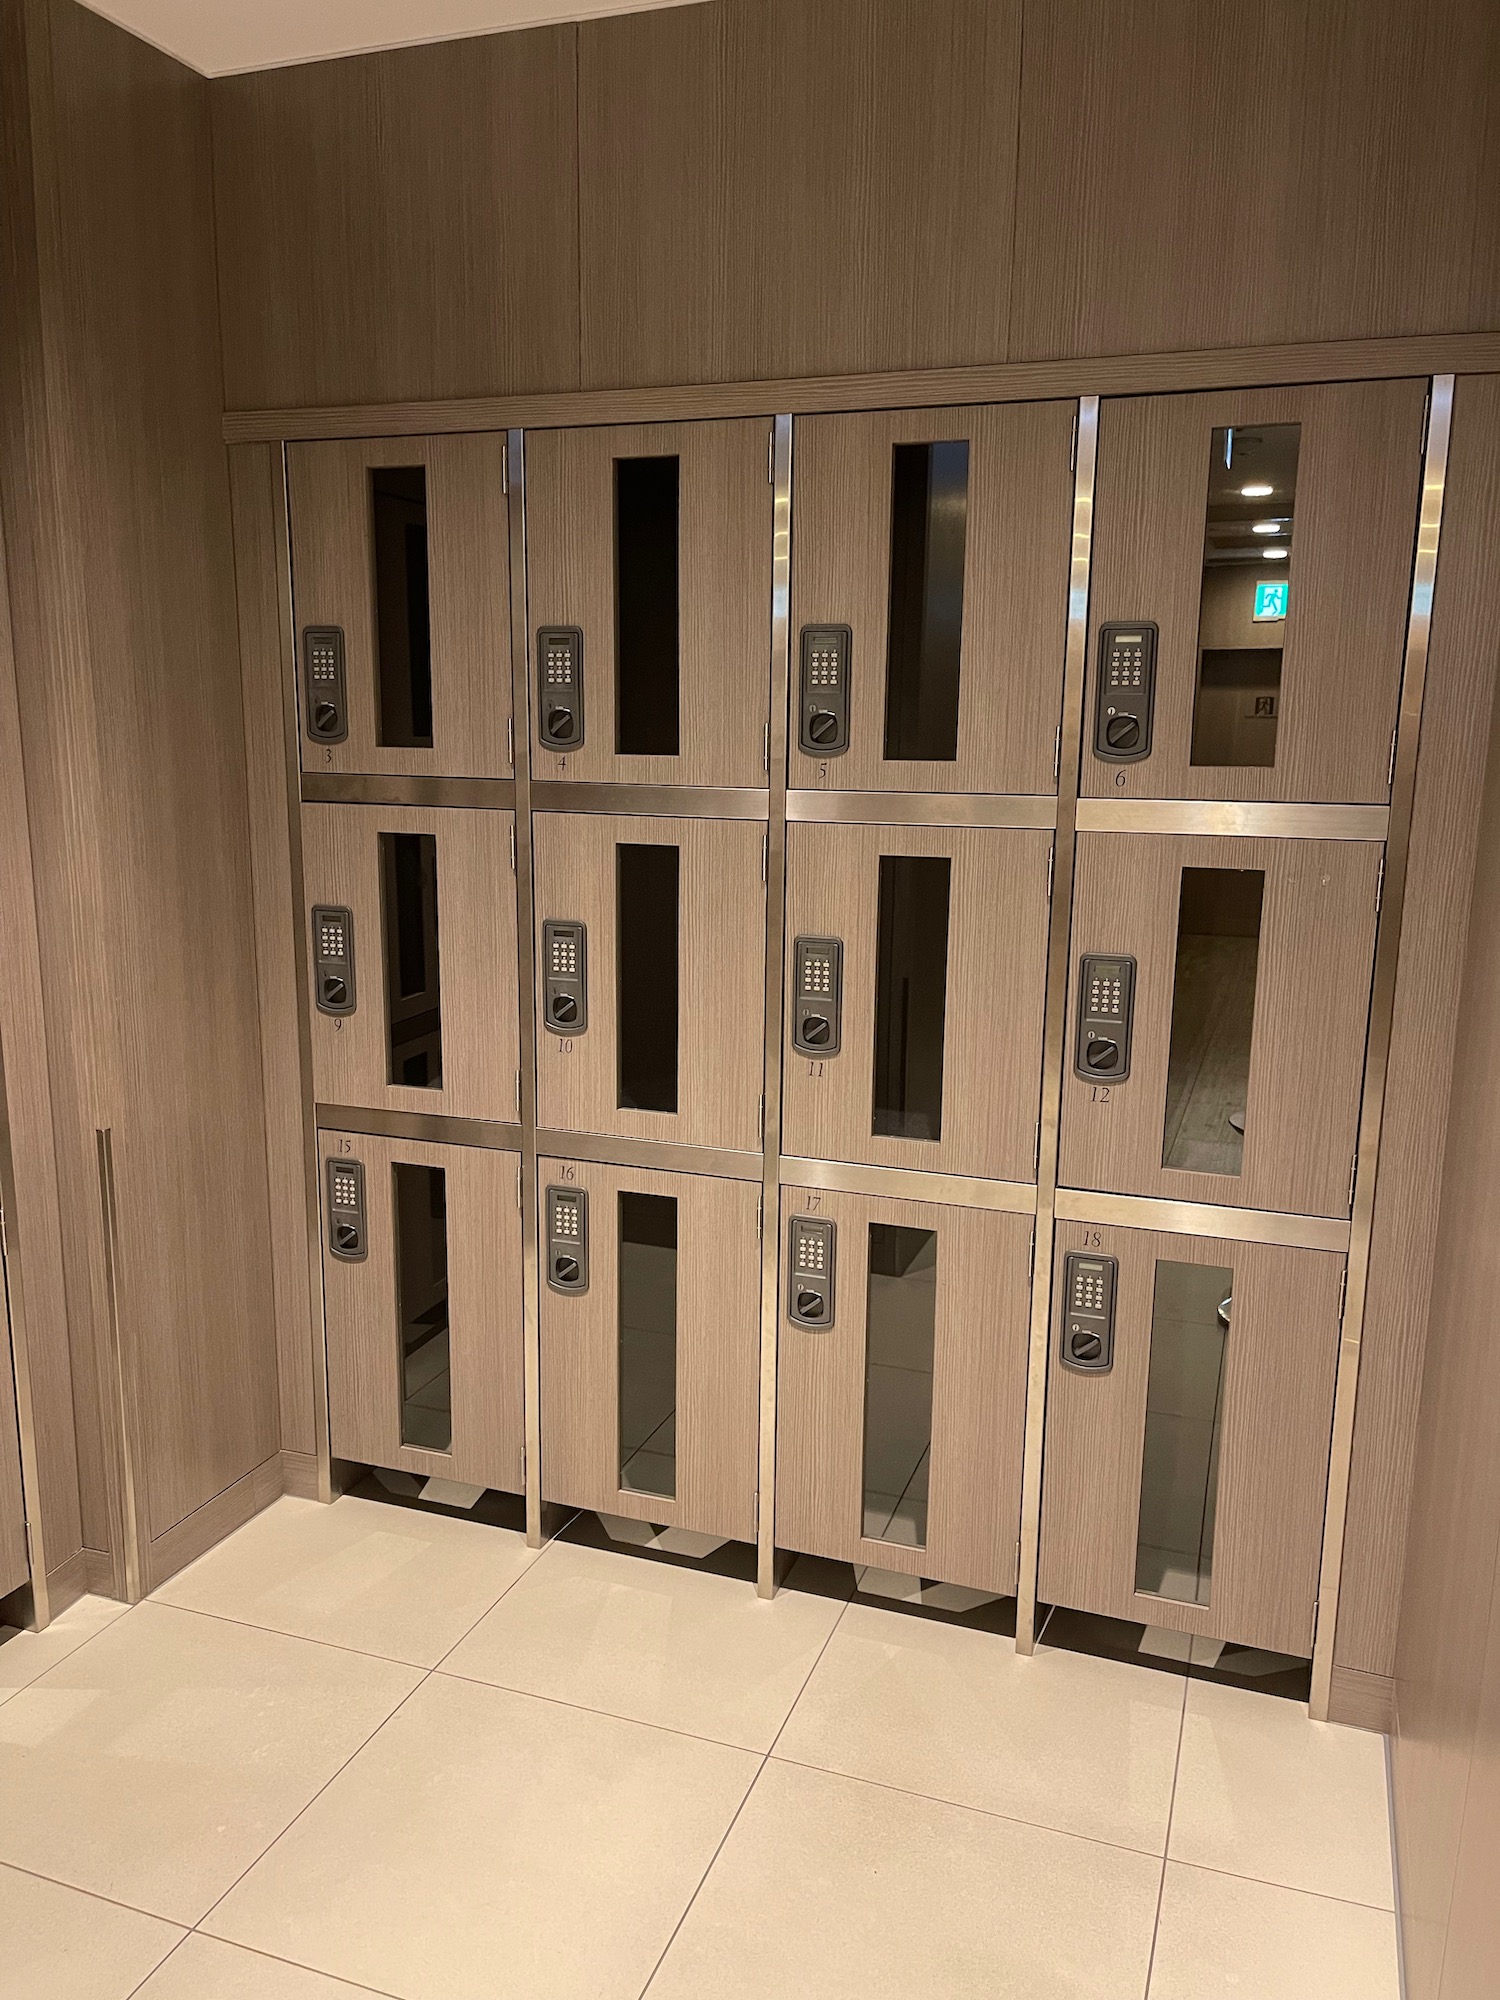 a group of lockers in a building